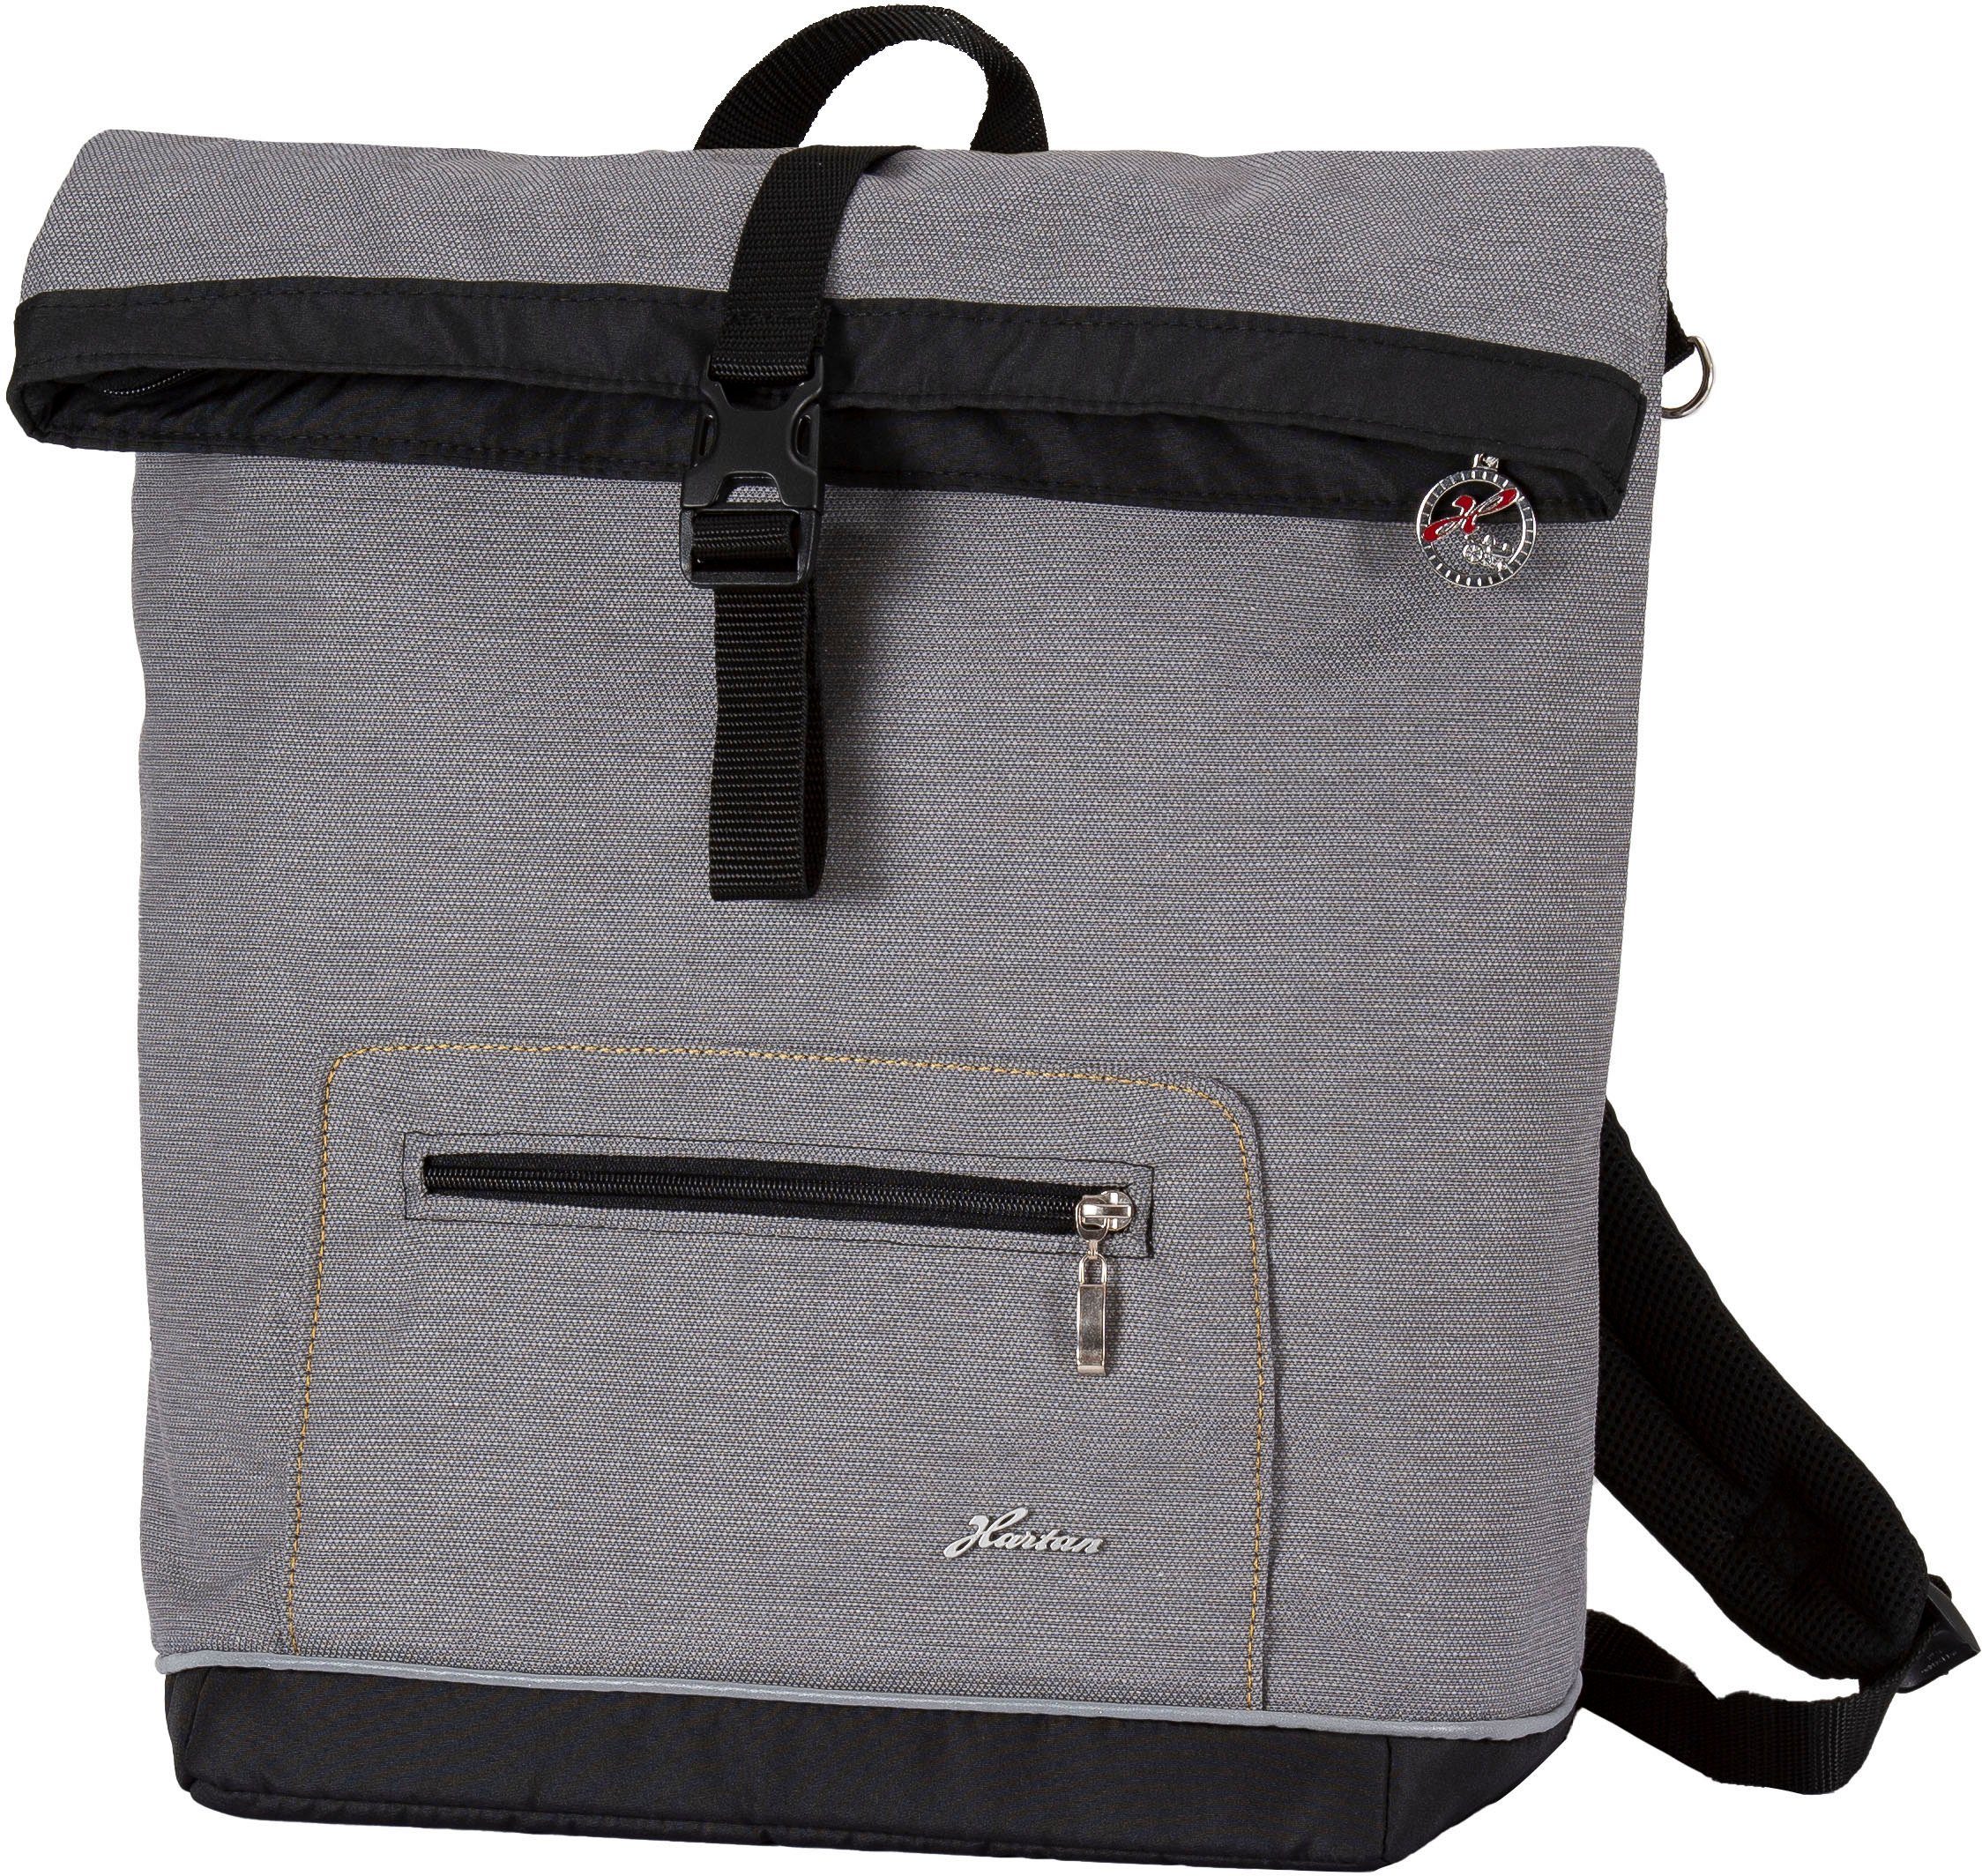 Hartan Wickelrucksack Space bag - Casual Collection, mit Thermofach; Made in Germany little zoo